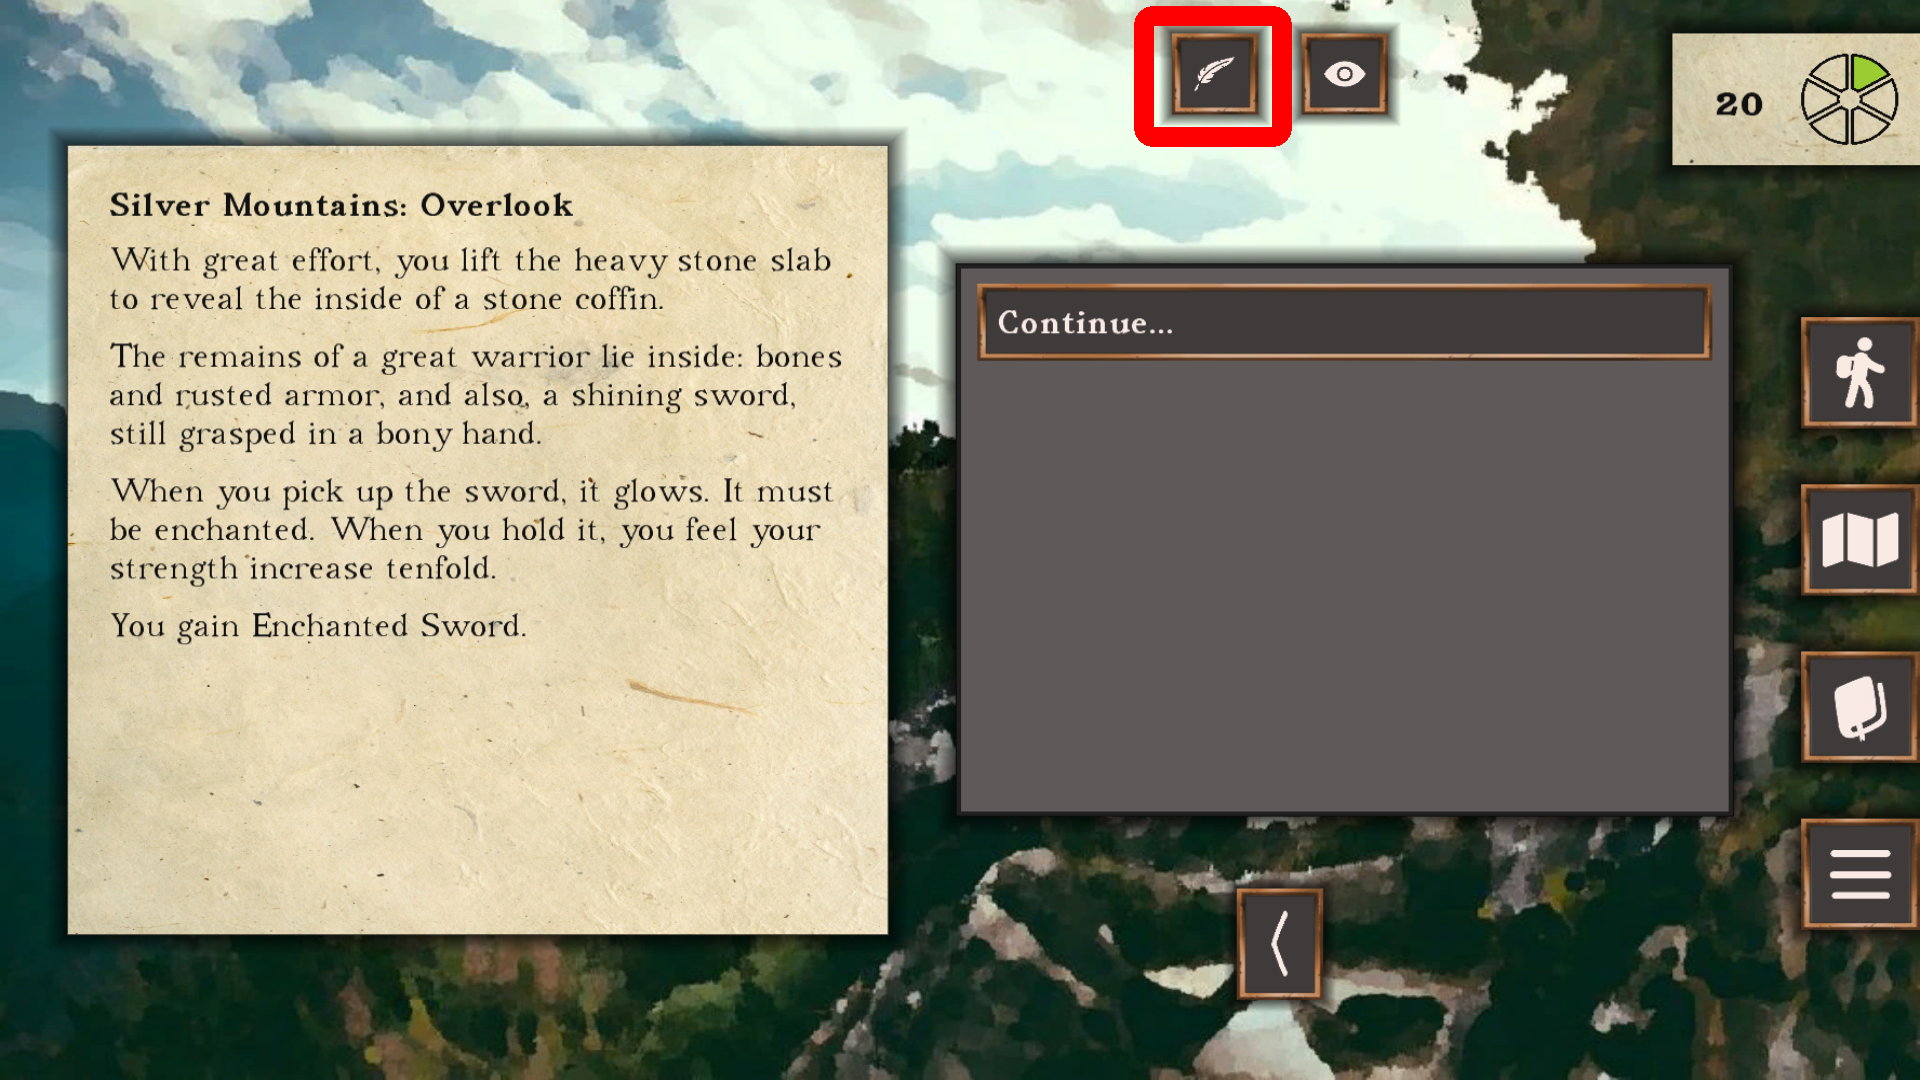 Screenshot of the player discovering the Enchanted Sword in the mountains: Circled in red at the top of the screen is a button with a Quill icon on it.